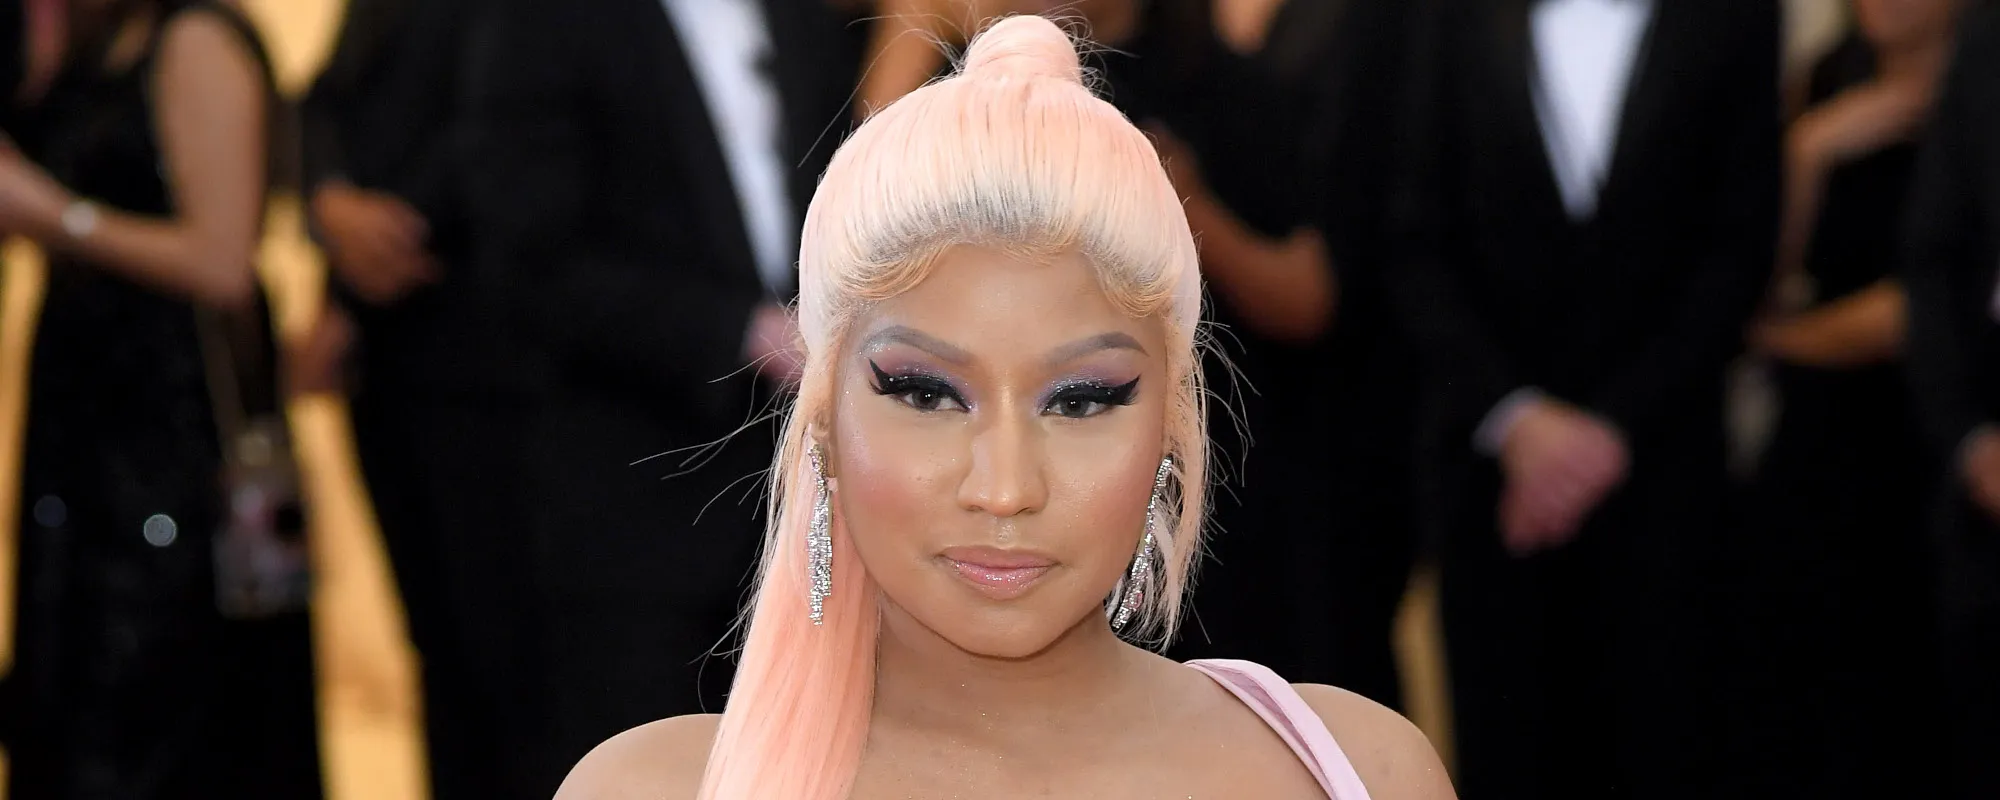 5 Songs You Didn’t Know Nicki Minaj Wrote for Other Artists